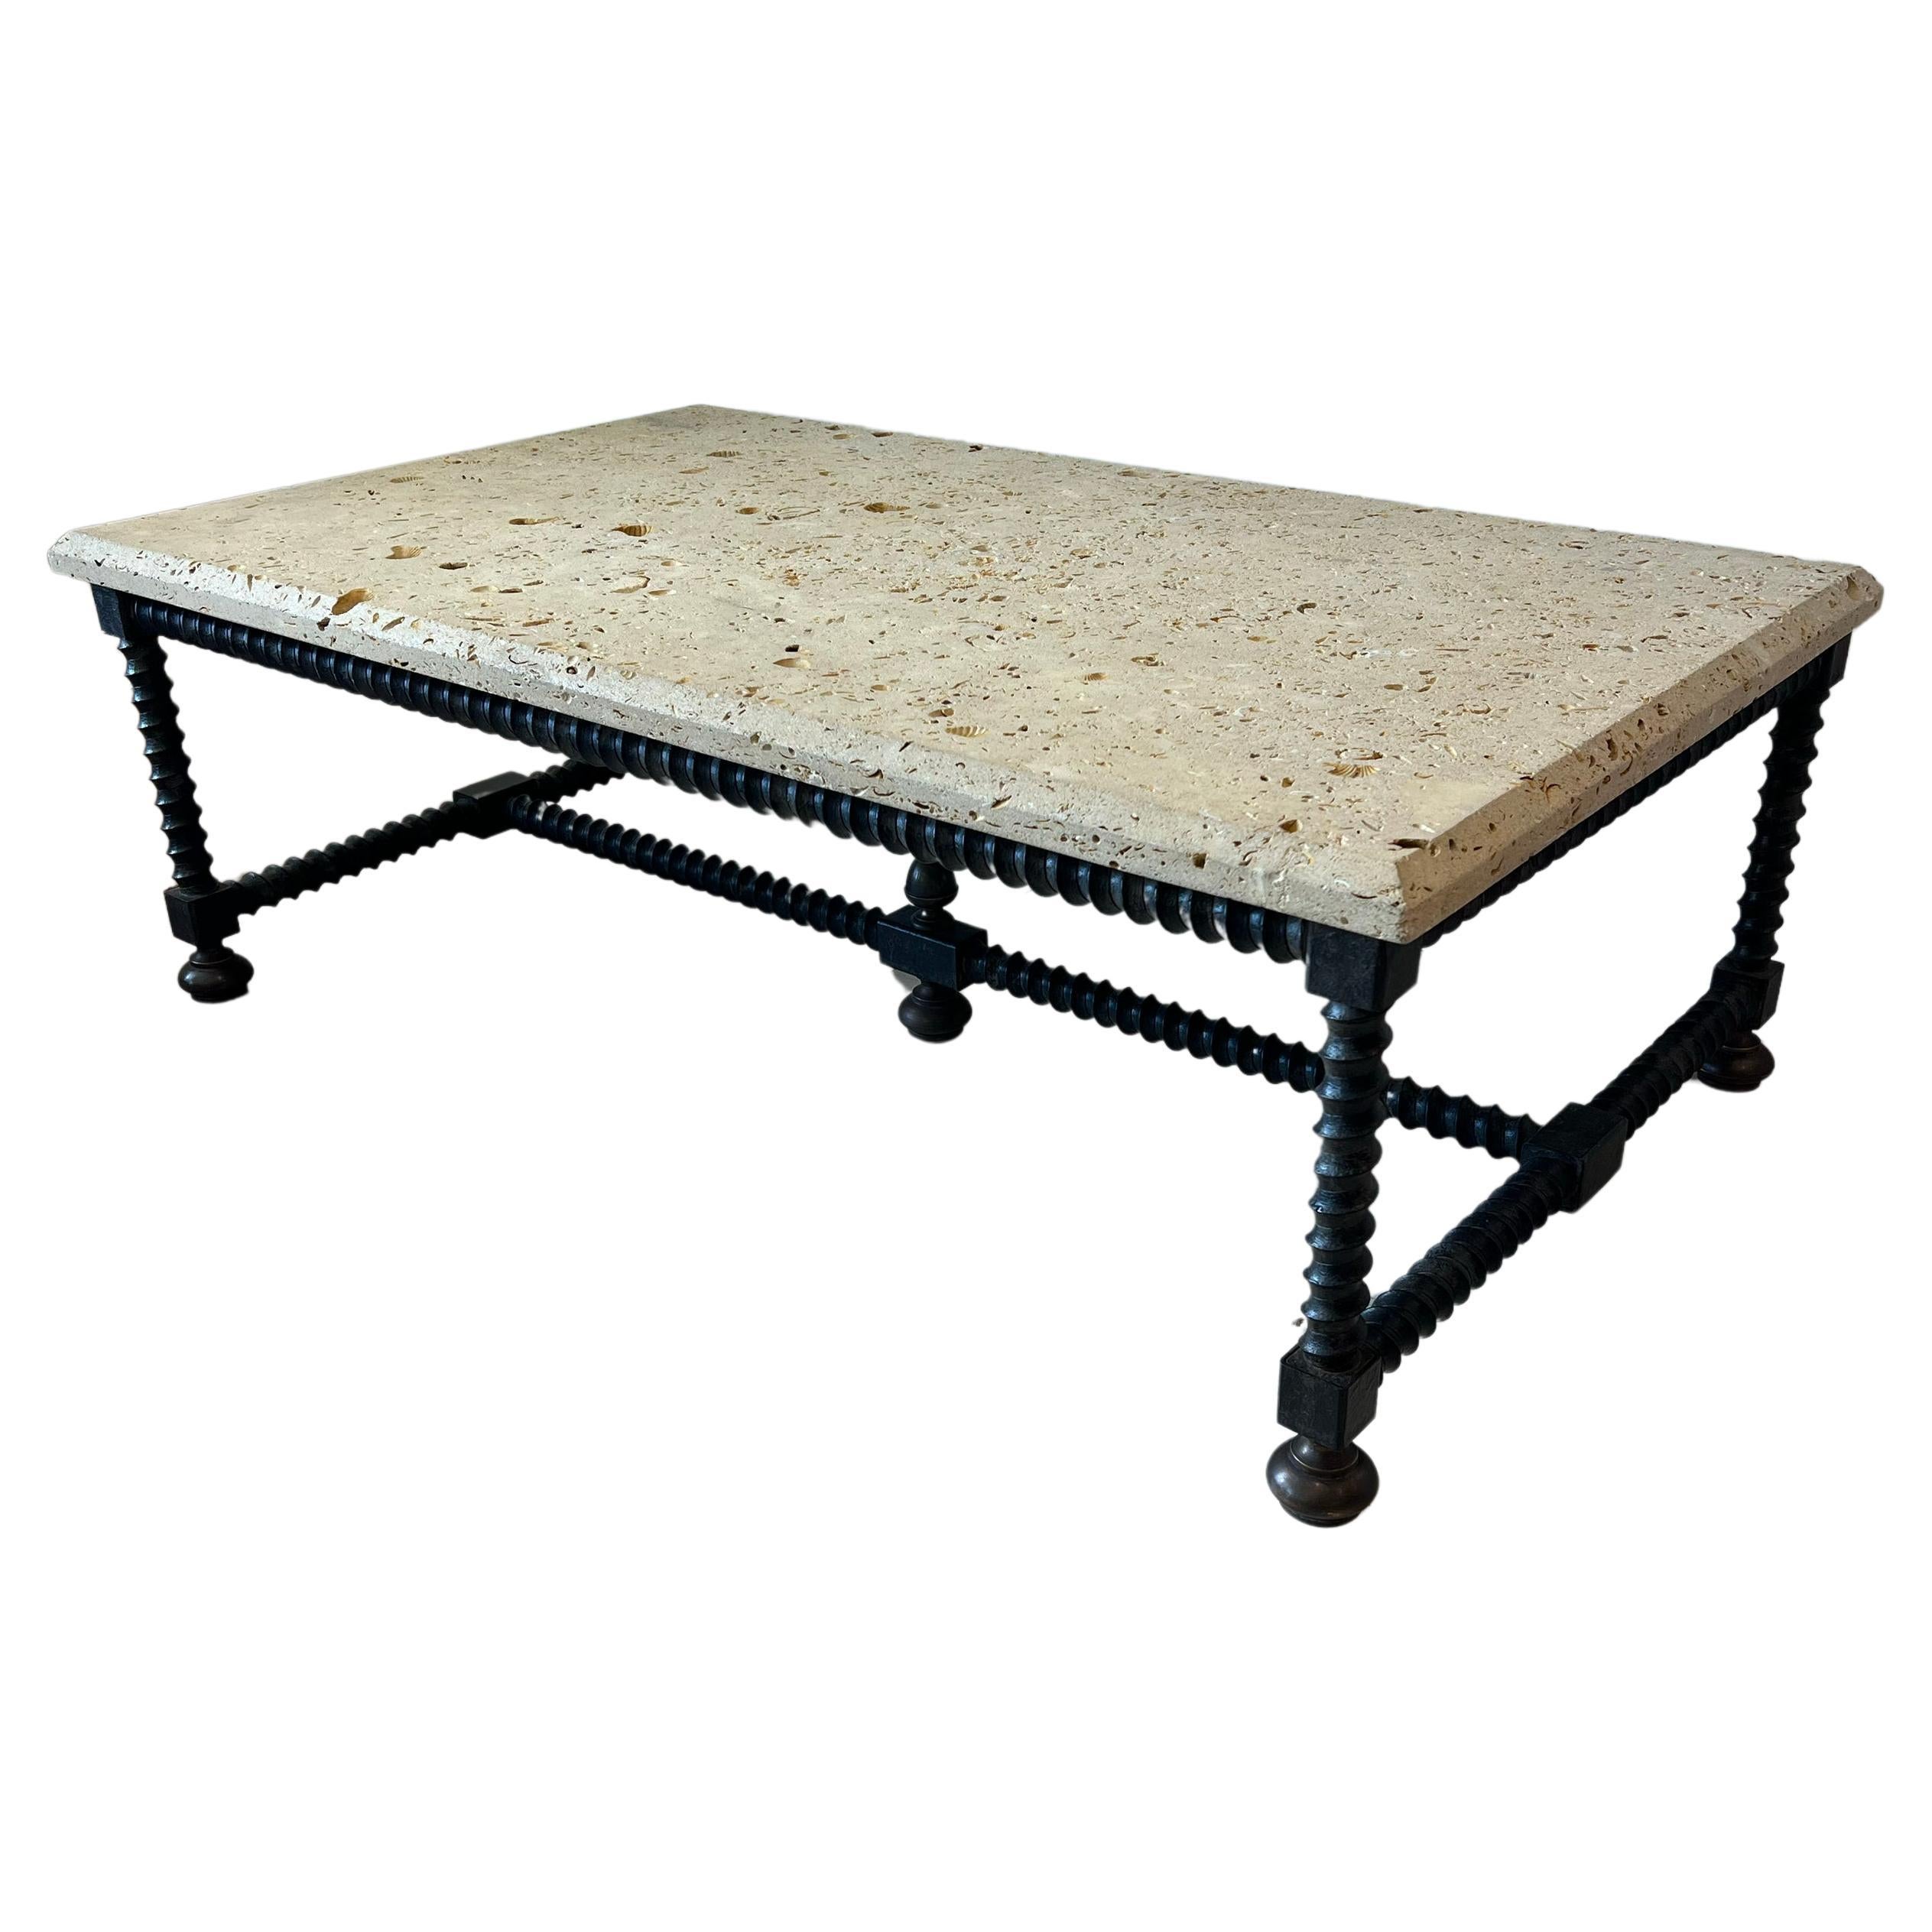 Baldacchino Coffee Table with Shell Stone Top and Iron Base by Formations